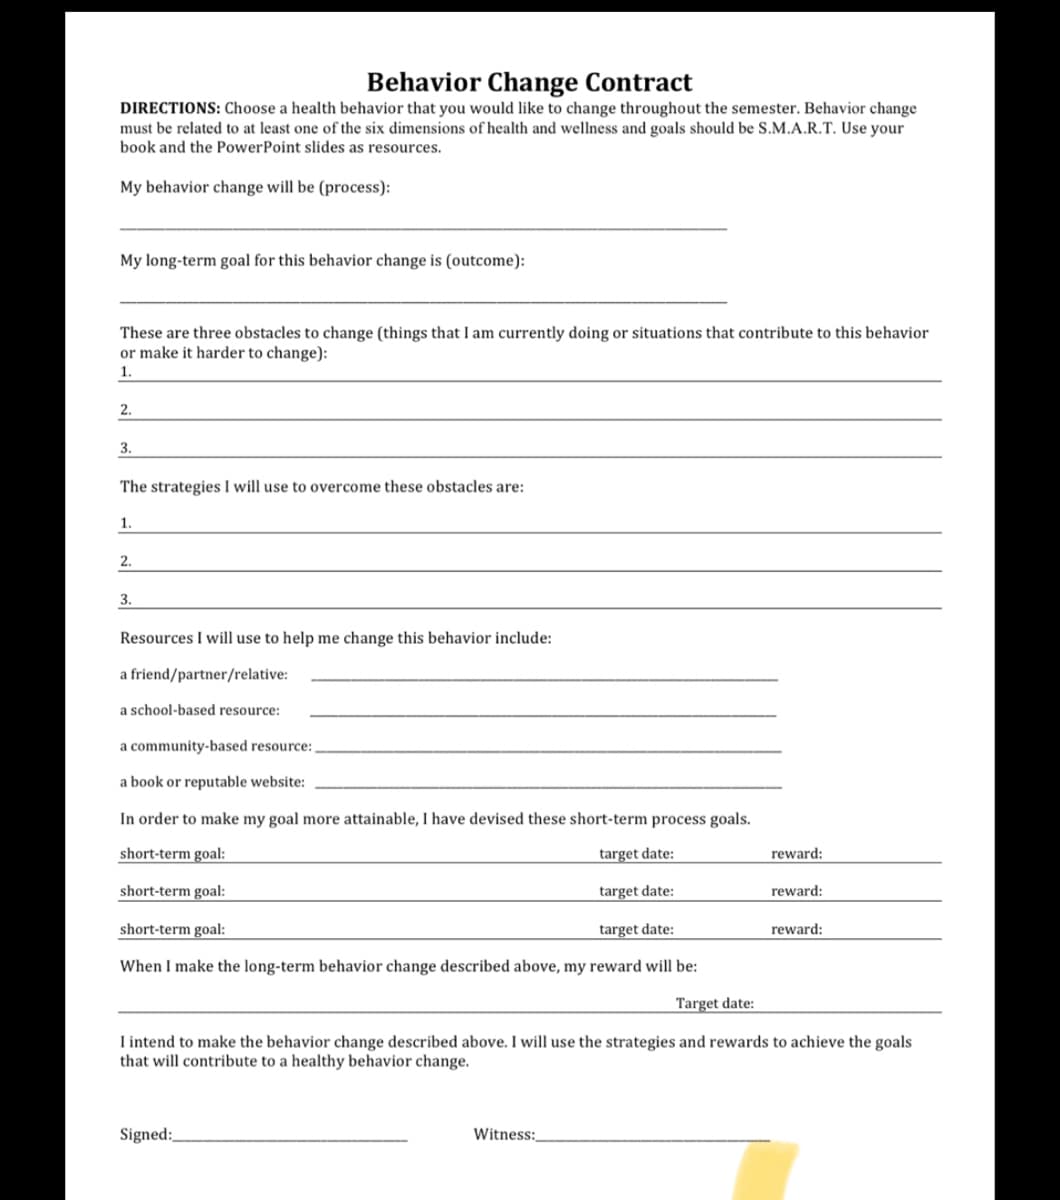 Behavior Change Contract
DIRECTIONS: Choose a health behavior that you would like to change throughout the semester. Behavior change
must be related to at least one of the six dimensions of health and wellness and goals should be S.M.A.R.T. Use your
book and the PowerPoint slides as resources.
My behavior change will be (process):
My long-term goal for this behavior change is (outcome):
These are three obstacles to change (things that I am currently doing or situations that contribute to this behavior
or make it harder to change):
1.
2.
3.
The strategies I will use to overcome these obstacles are:
1.
2.
3.
Resources I will use to help me change this behavior include:
a friend/partner/relative:
a school-based resource:
a community-based resource:,
a book or reputable website:
In order to make my goal more attainable, I have devised these short-term process goals.
short-term goal:
target date:
short-term goal:
Signed:
target date:
Witness:
reward:
short-term goal:
target date:
When I make the long-term behavior change described above, my reward will be:
Target date:
I intend to make the behavior change described above. I will use the strategies and rewards to achieve the goals
that will contribute to a healthy behavior change.
reward:
reward: